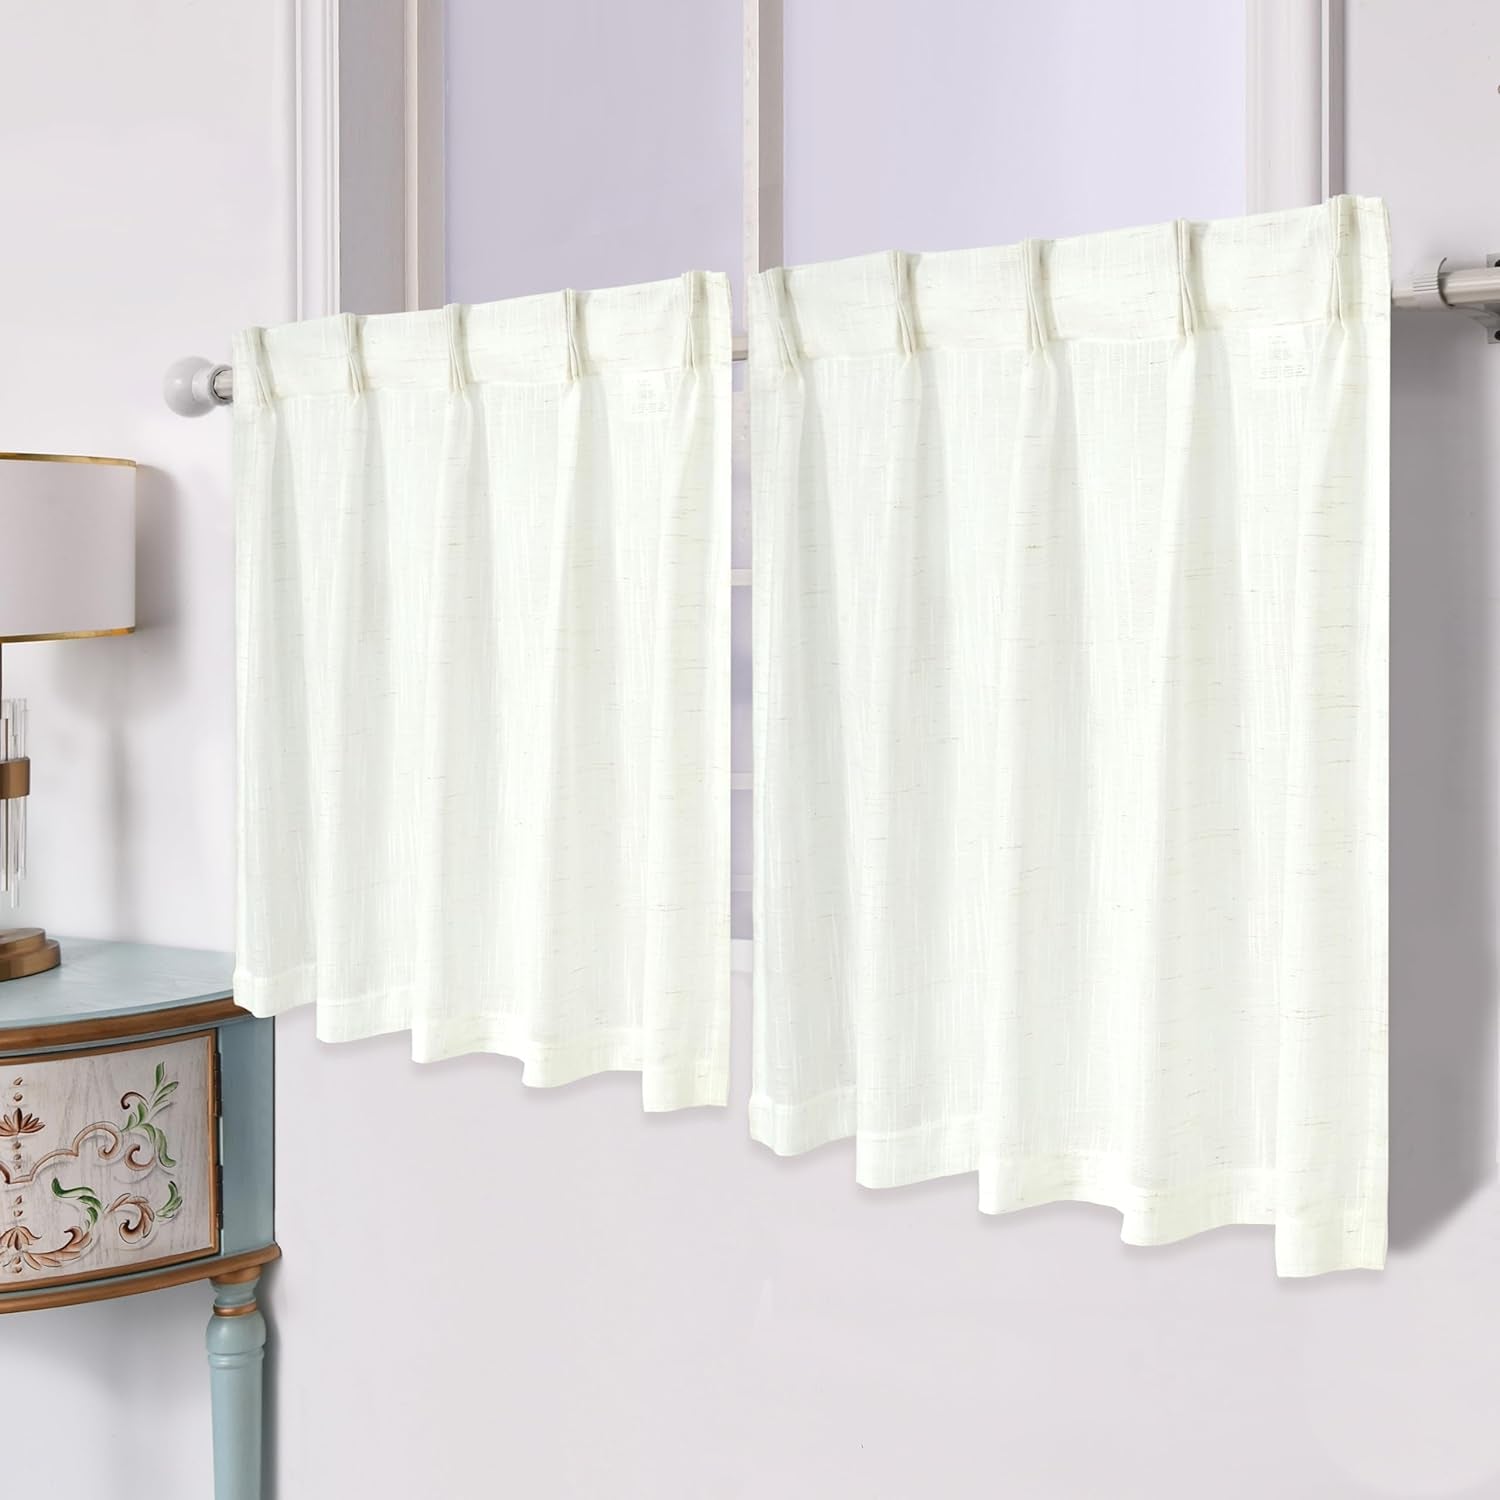 Driftaway Pinch Pleat Kitchen Curtains Linen Textured Short Linen Curtains for Bathroom Laundry Room Cafe Curtains Half Window Curtains 2 Panels Farmhouse Rustic Back Tabs 30 X 36 Inches Ivory Birch  DriftAway   